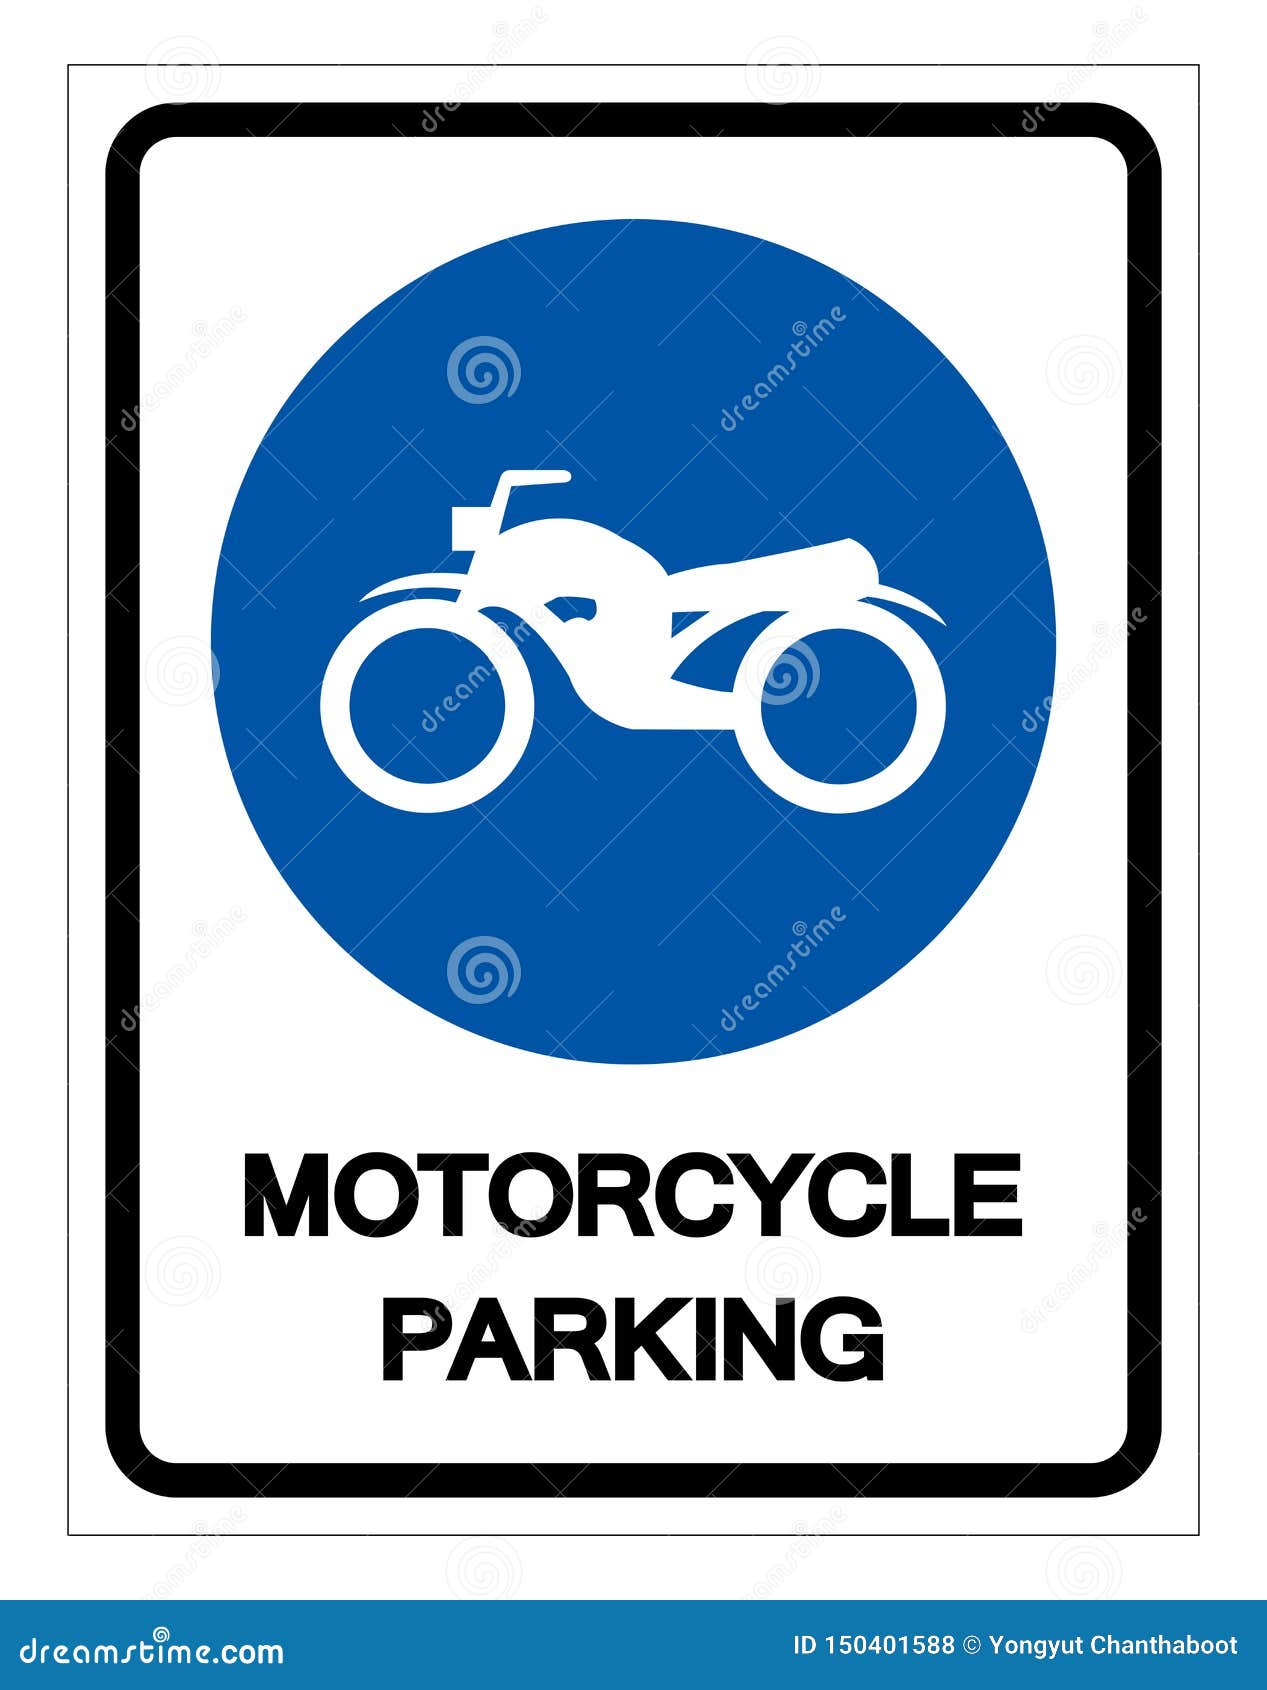 Motorcycle Parking Symbol Sign Isolate On White Background,Vector ...